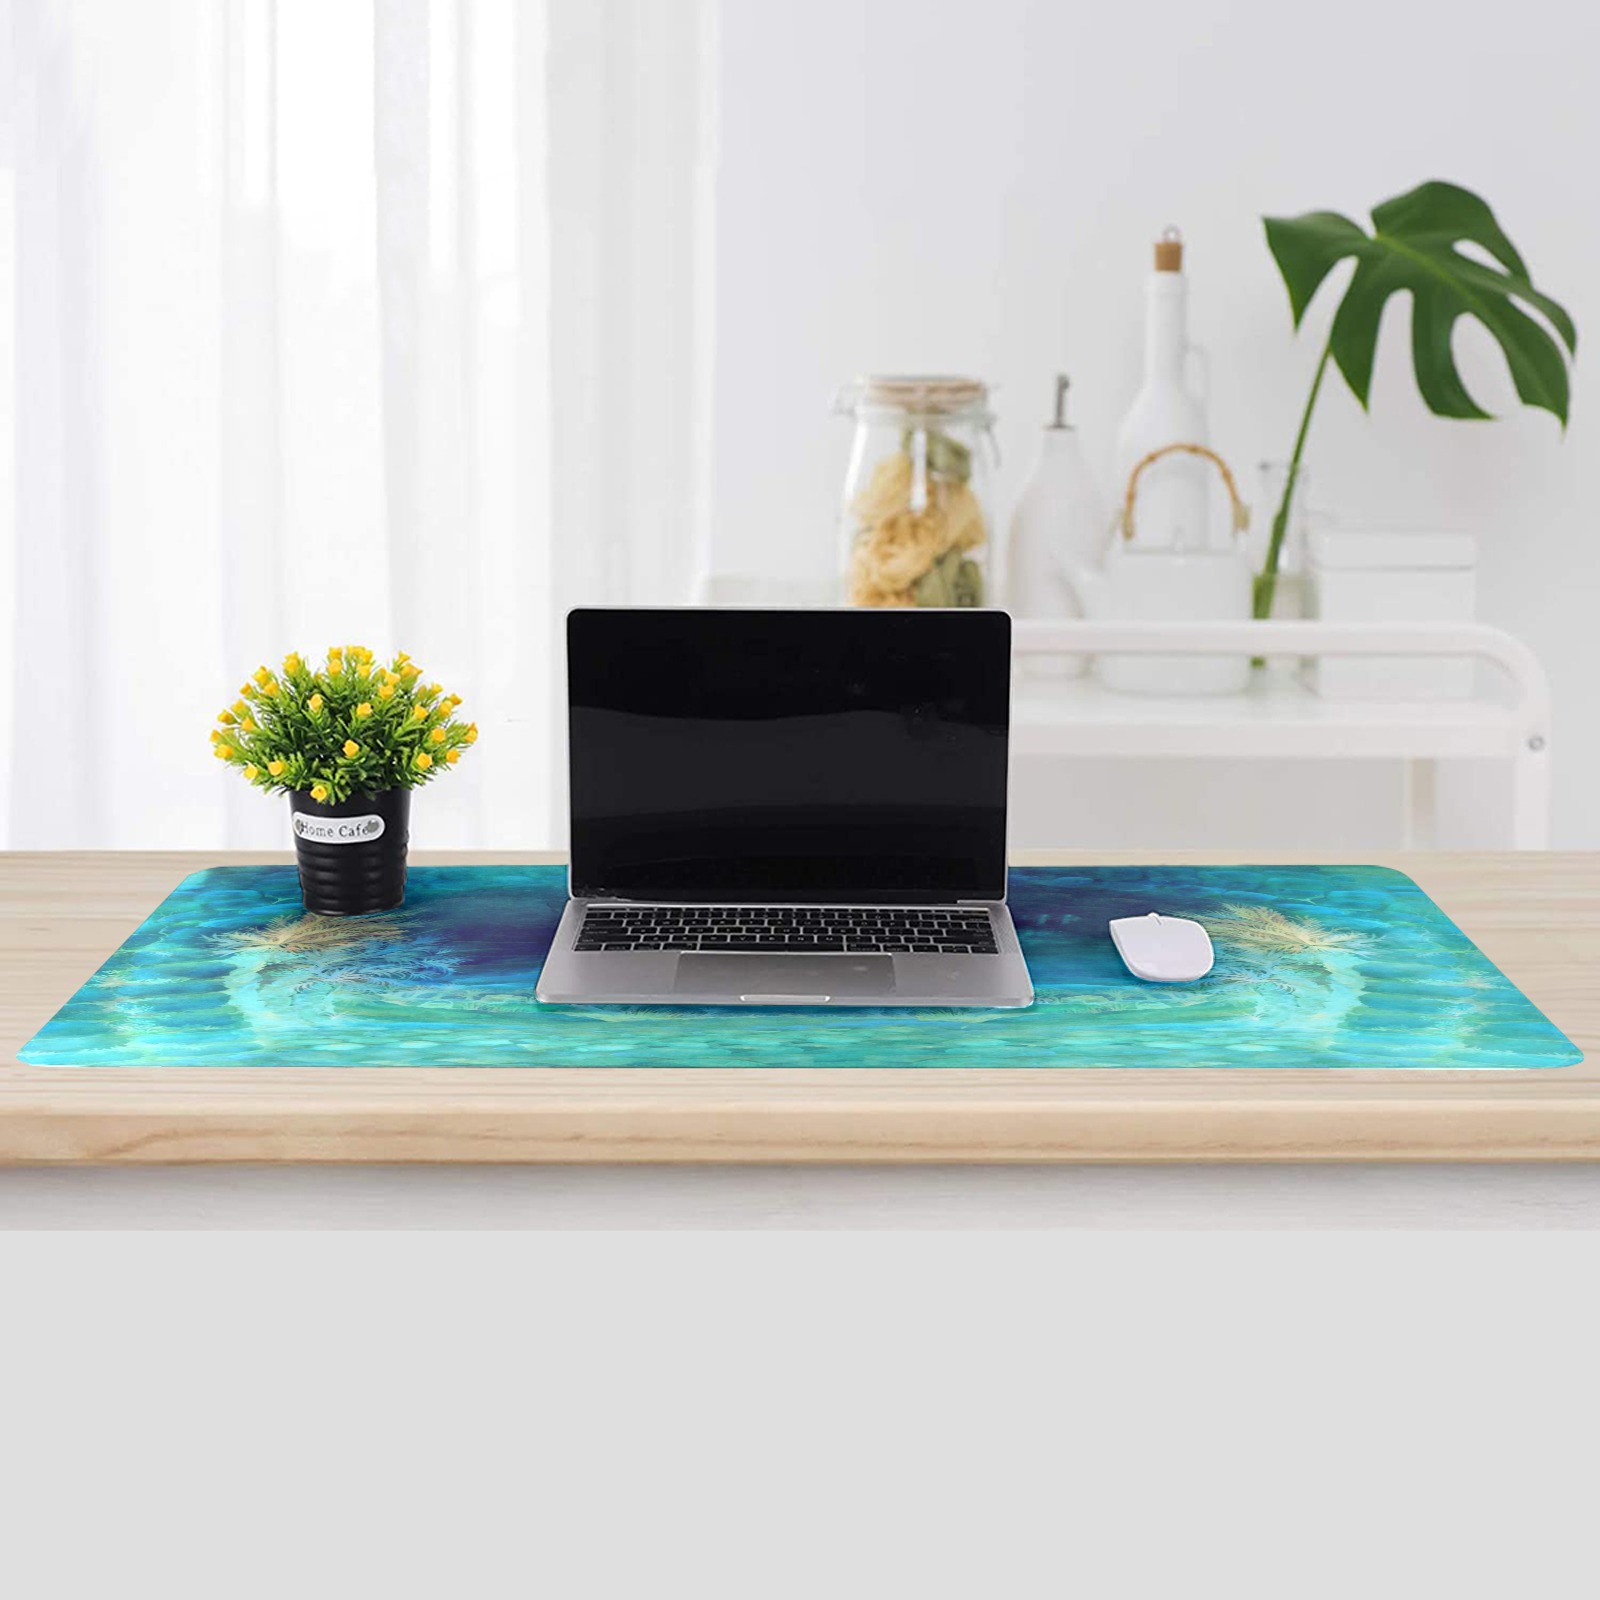 desert 3-35x16 inches Gaming Mousepad (35"x16")